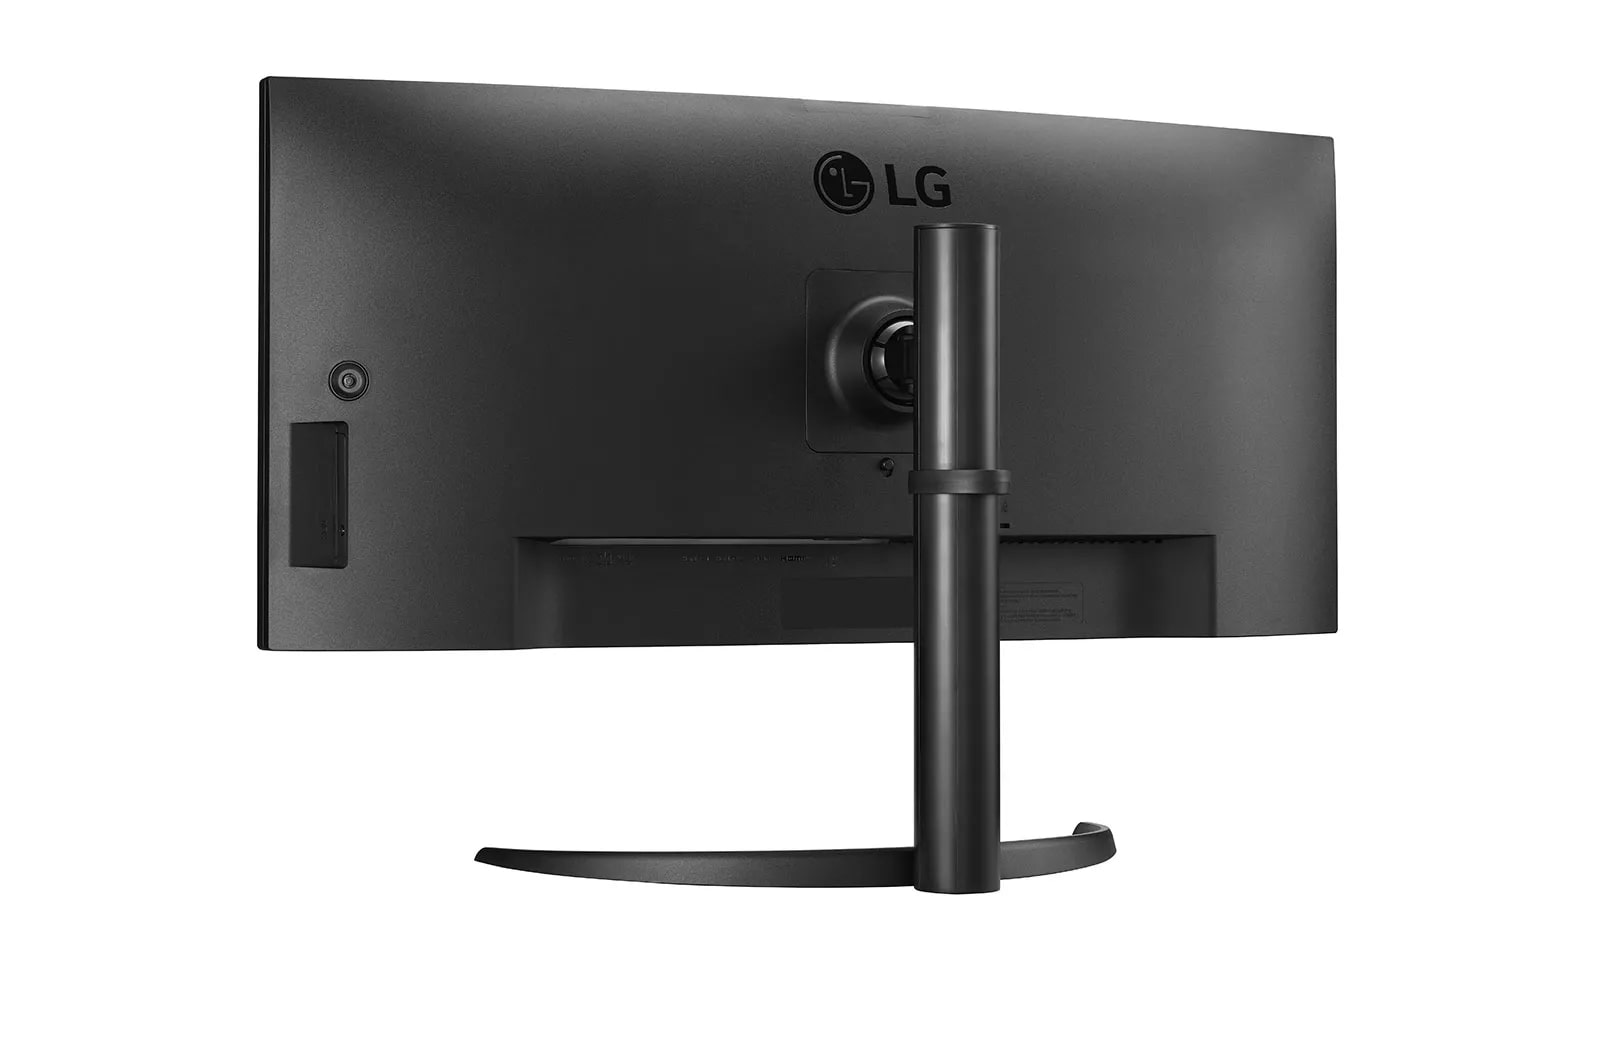  LG UltraWide QHD 34-Inch Curved Computer Monitor 34WQ73A-B, IPS  with HDR 10 Compatibility, Built-In-KVM, and USB Type-C, Black : Electronics